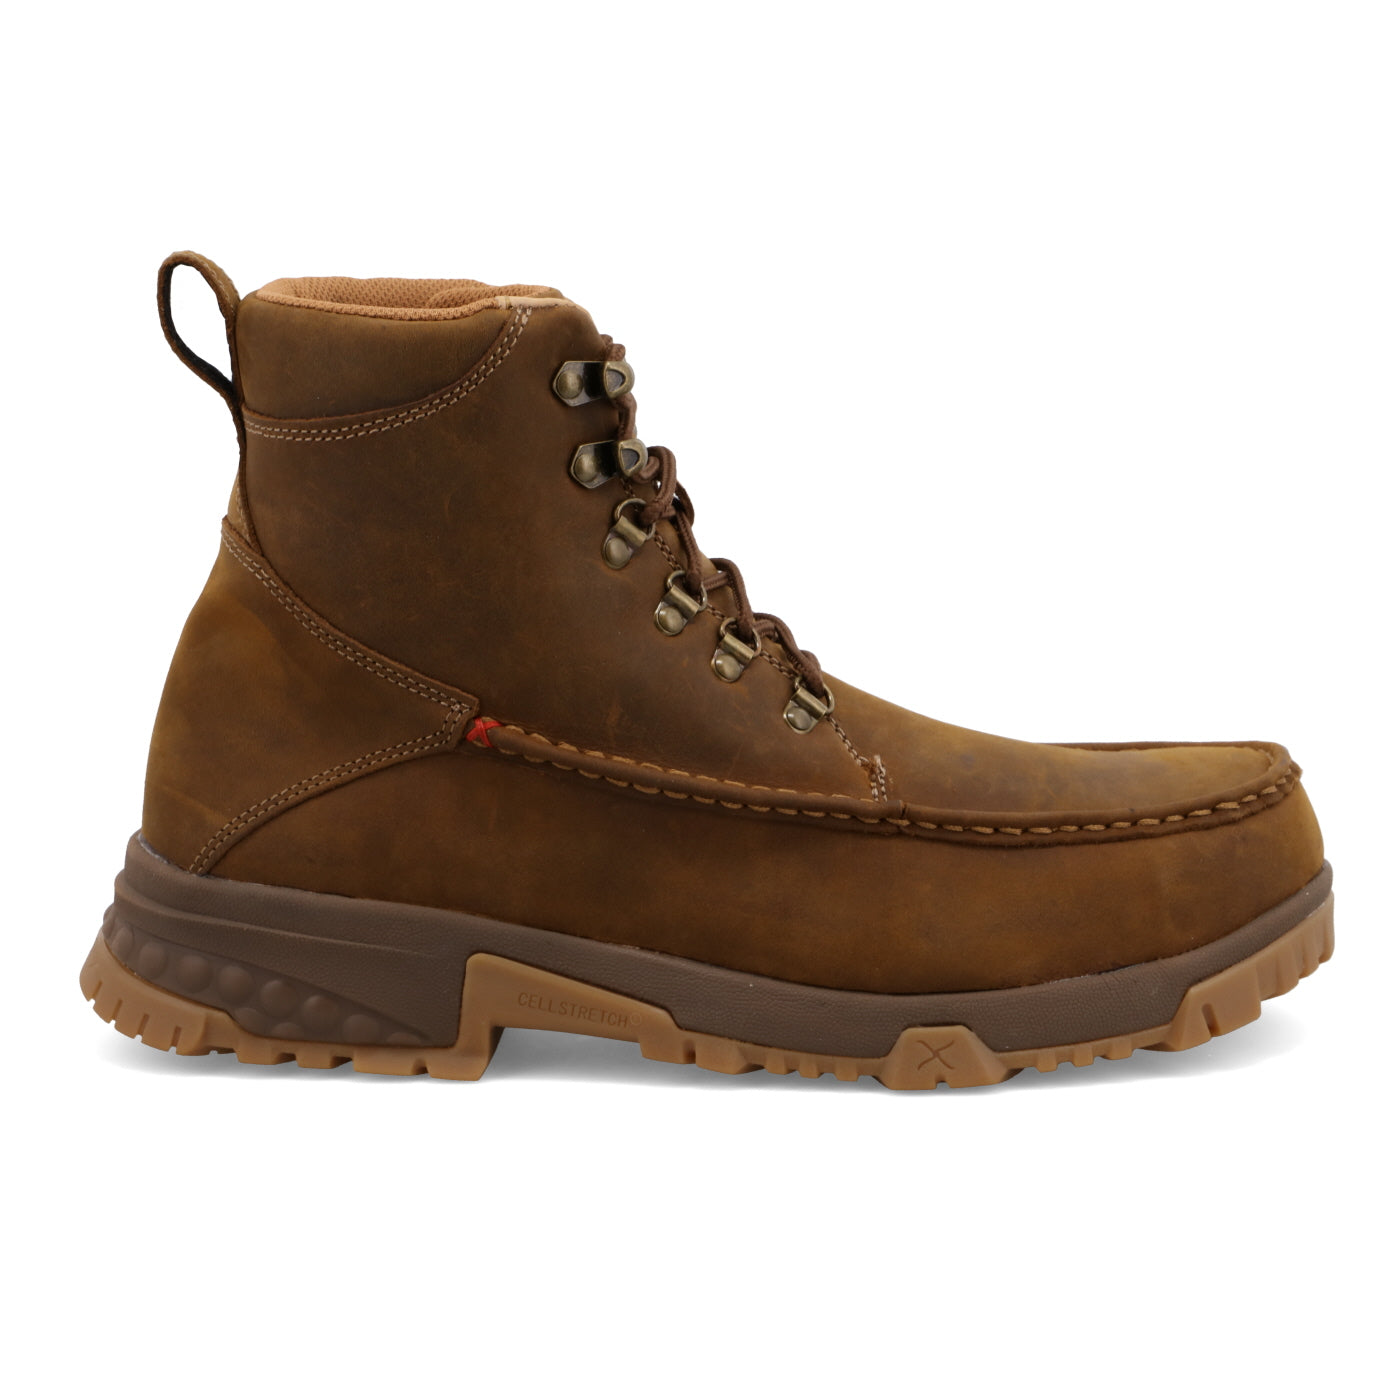 Twisted X 6" Work lace up composite toe boot